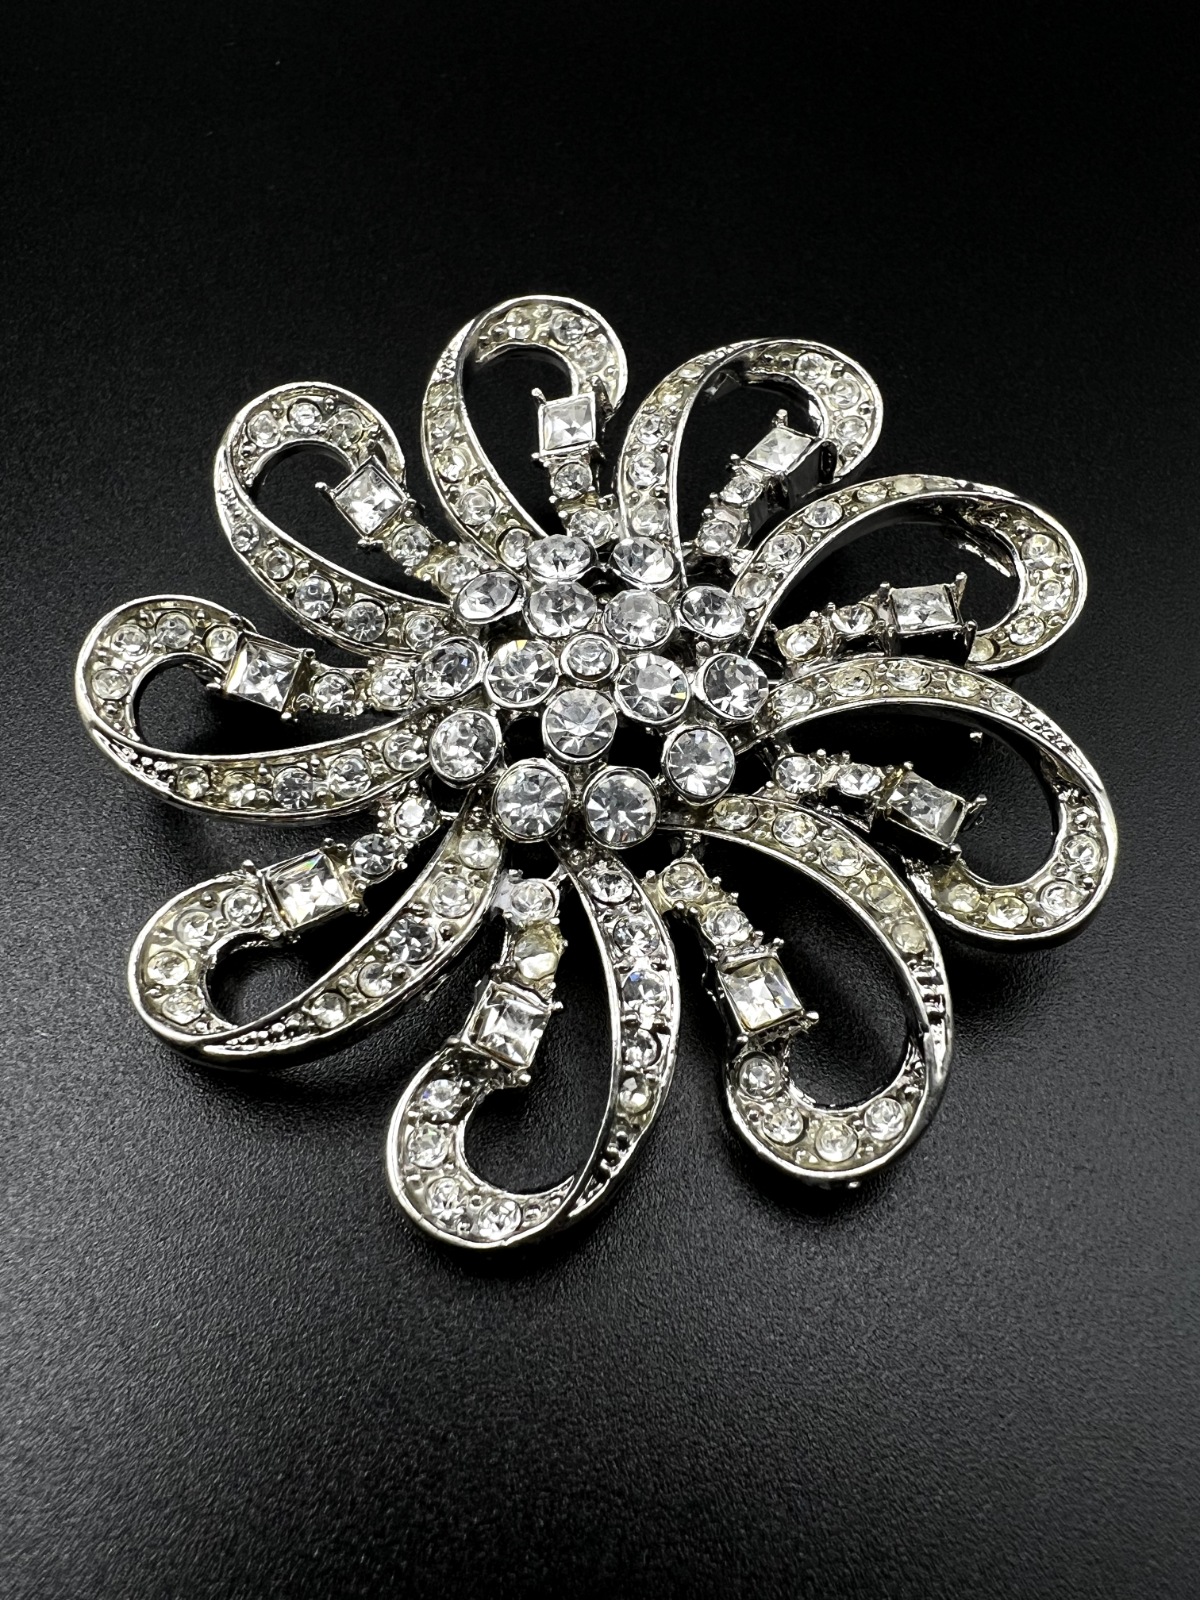 Dazzling Rhinestone Women's Brooches & Pins. Bouquet, Floral, Oval, Crown